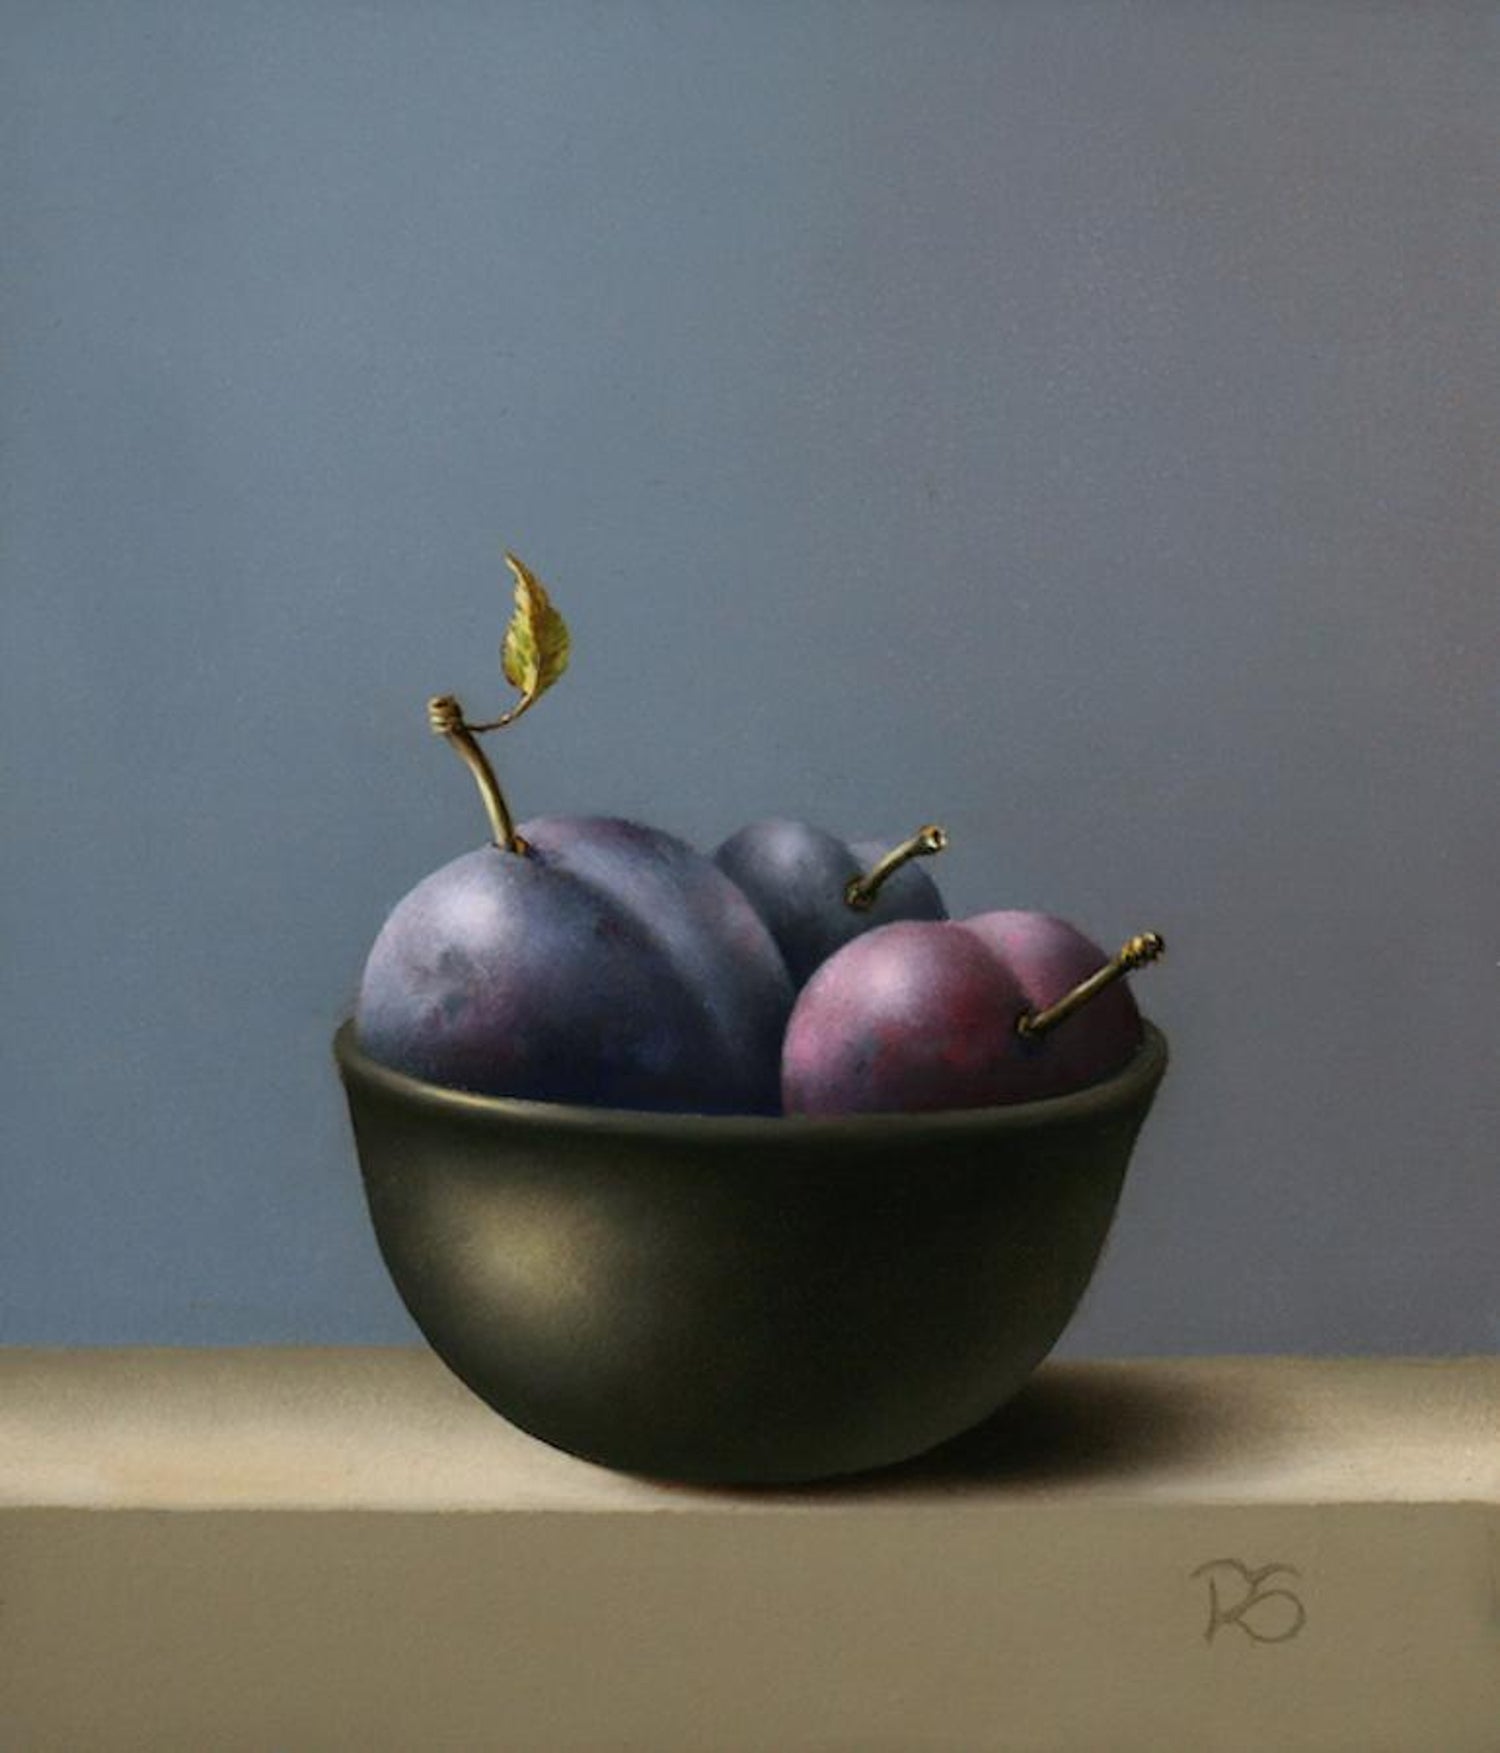 René Smoorenburg - "Blue Plums in a Bowl" Contemporary Fine Realist  Still-Life Painting of Fruit For Sale at 1stDibs